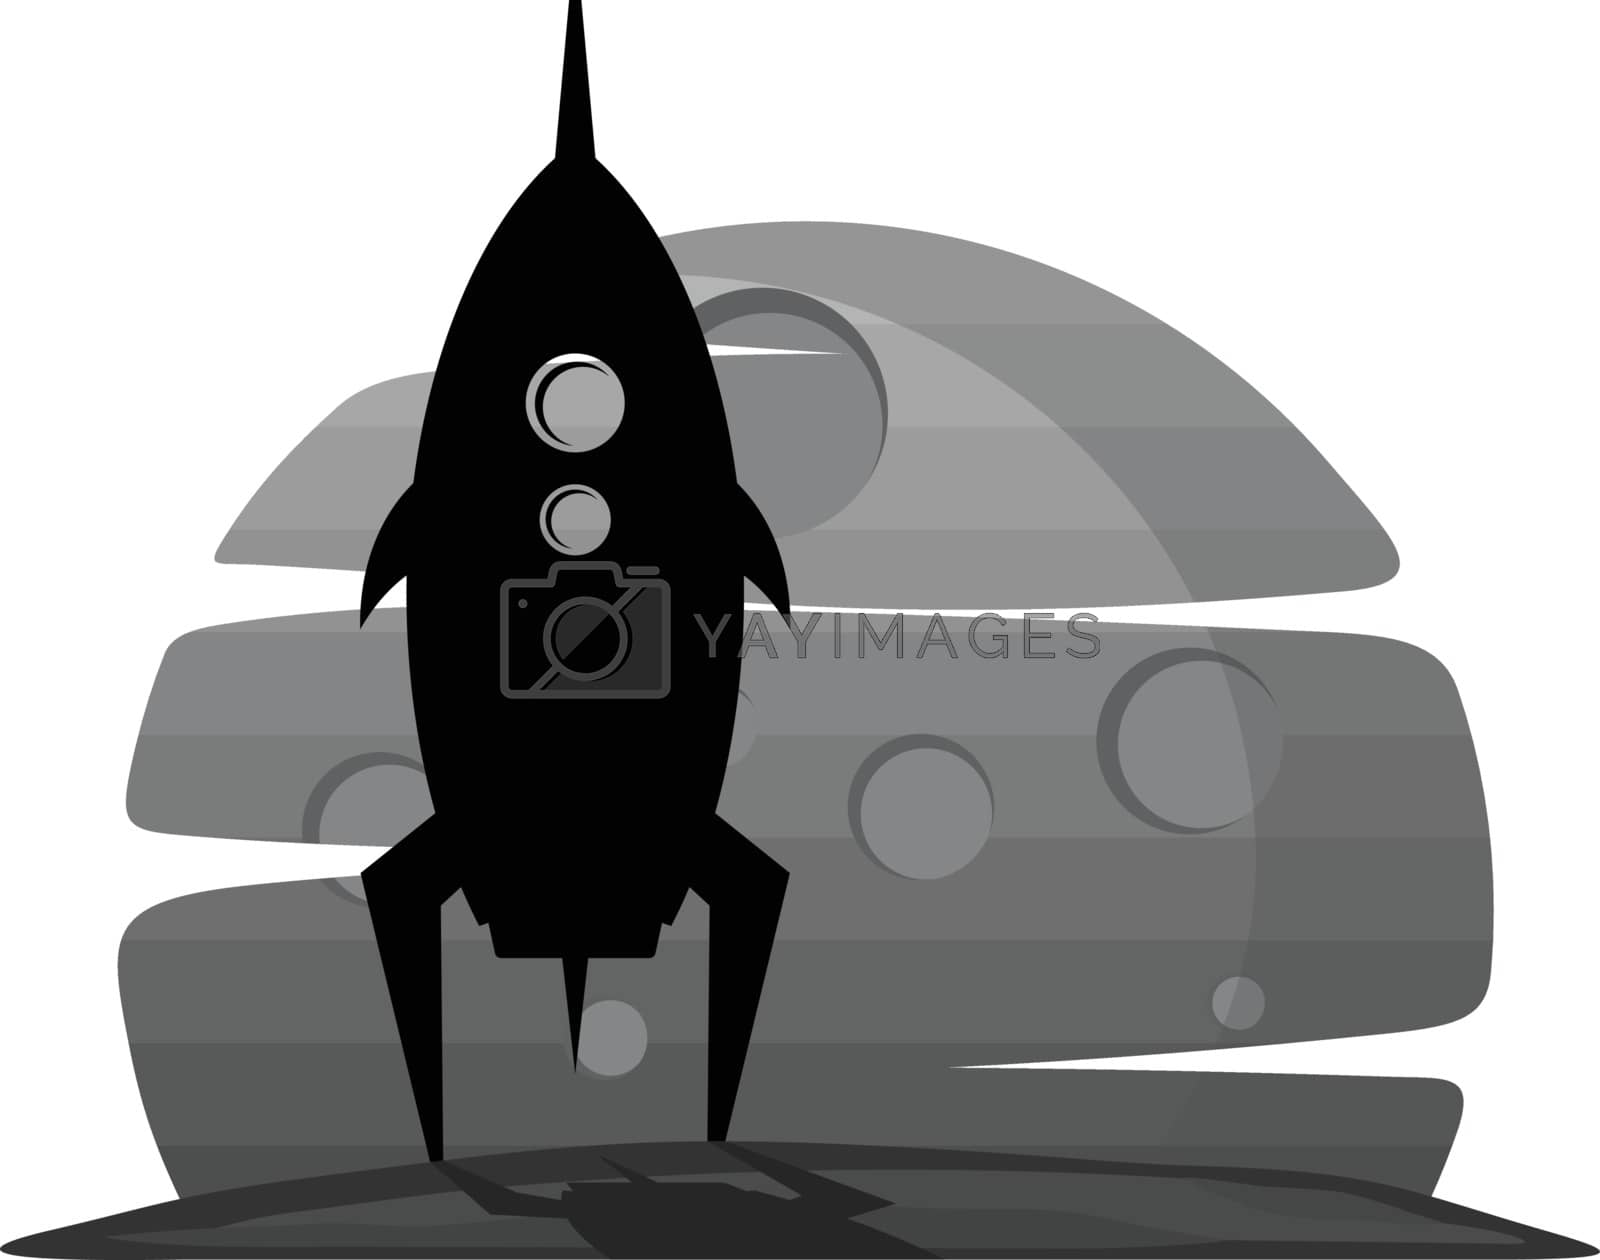 Royalty free image of space rocket shuttle by vector1st